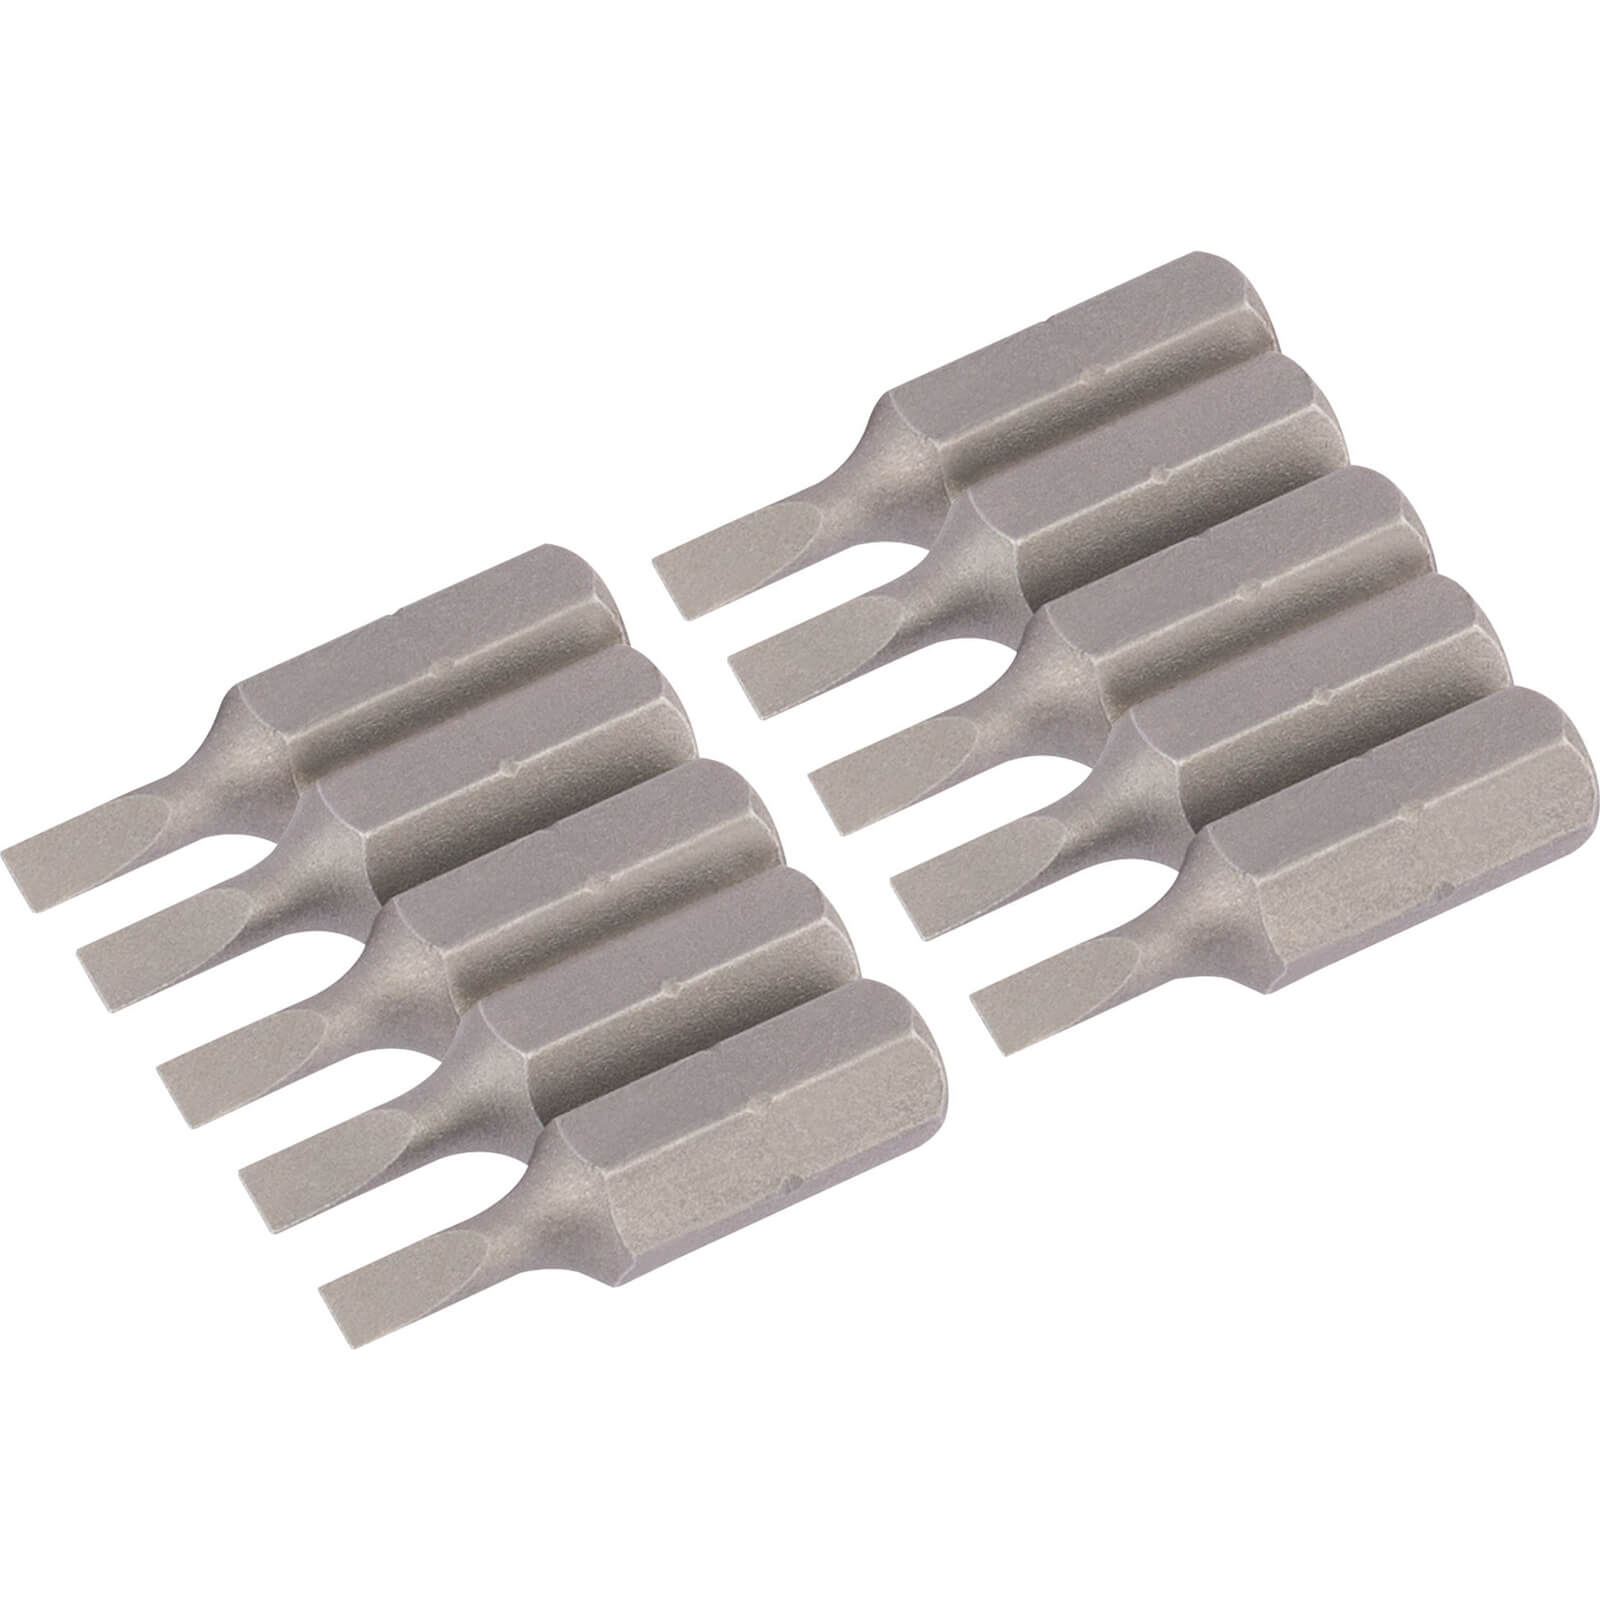 Image of Draper Slotted Screwdriver Bit 3mm 25mm Pack of 10